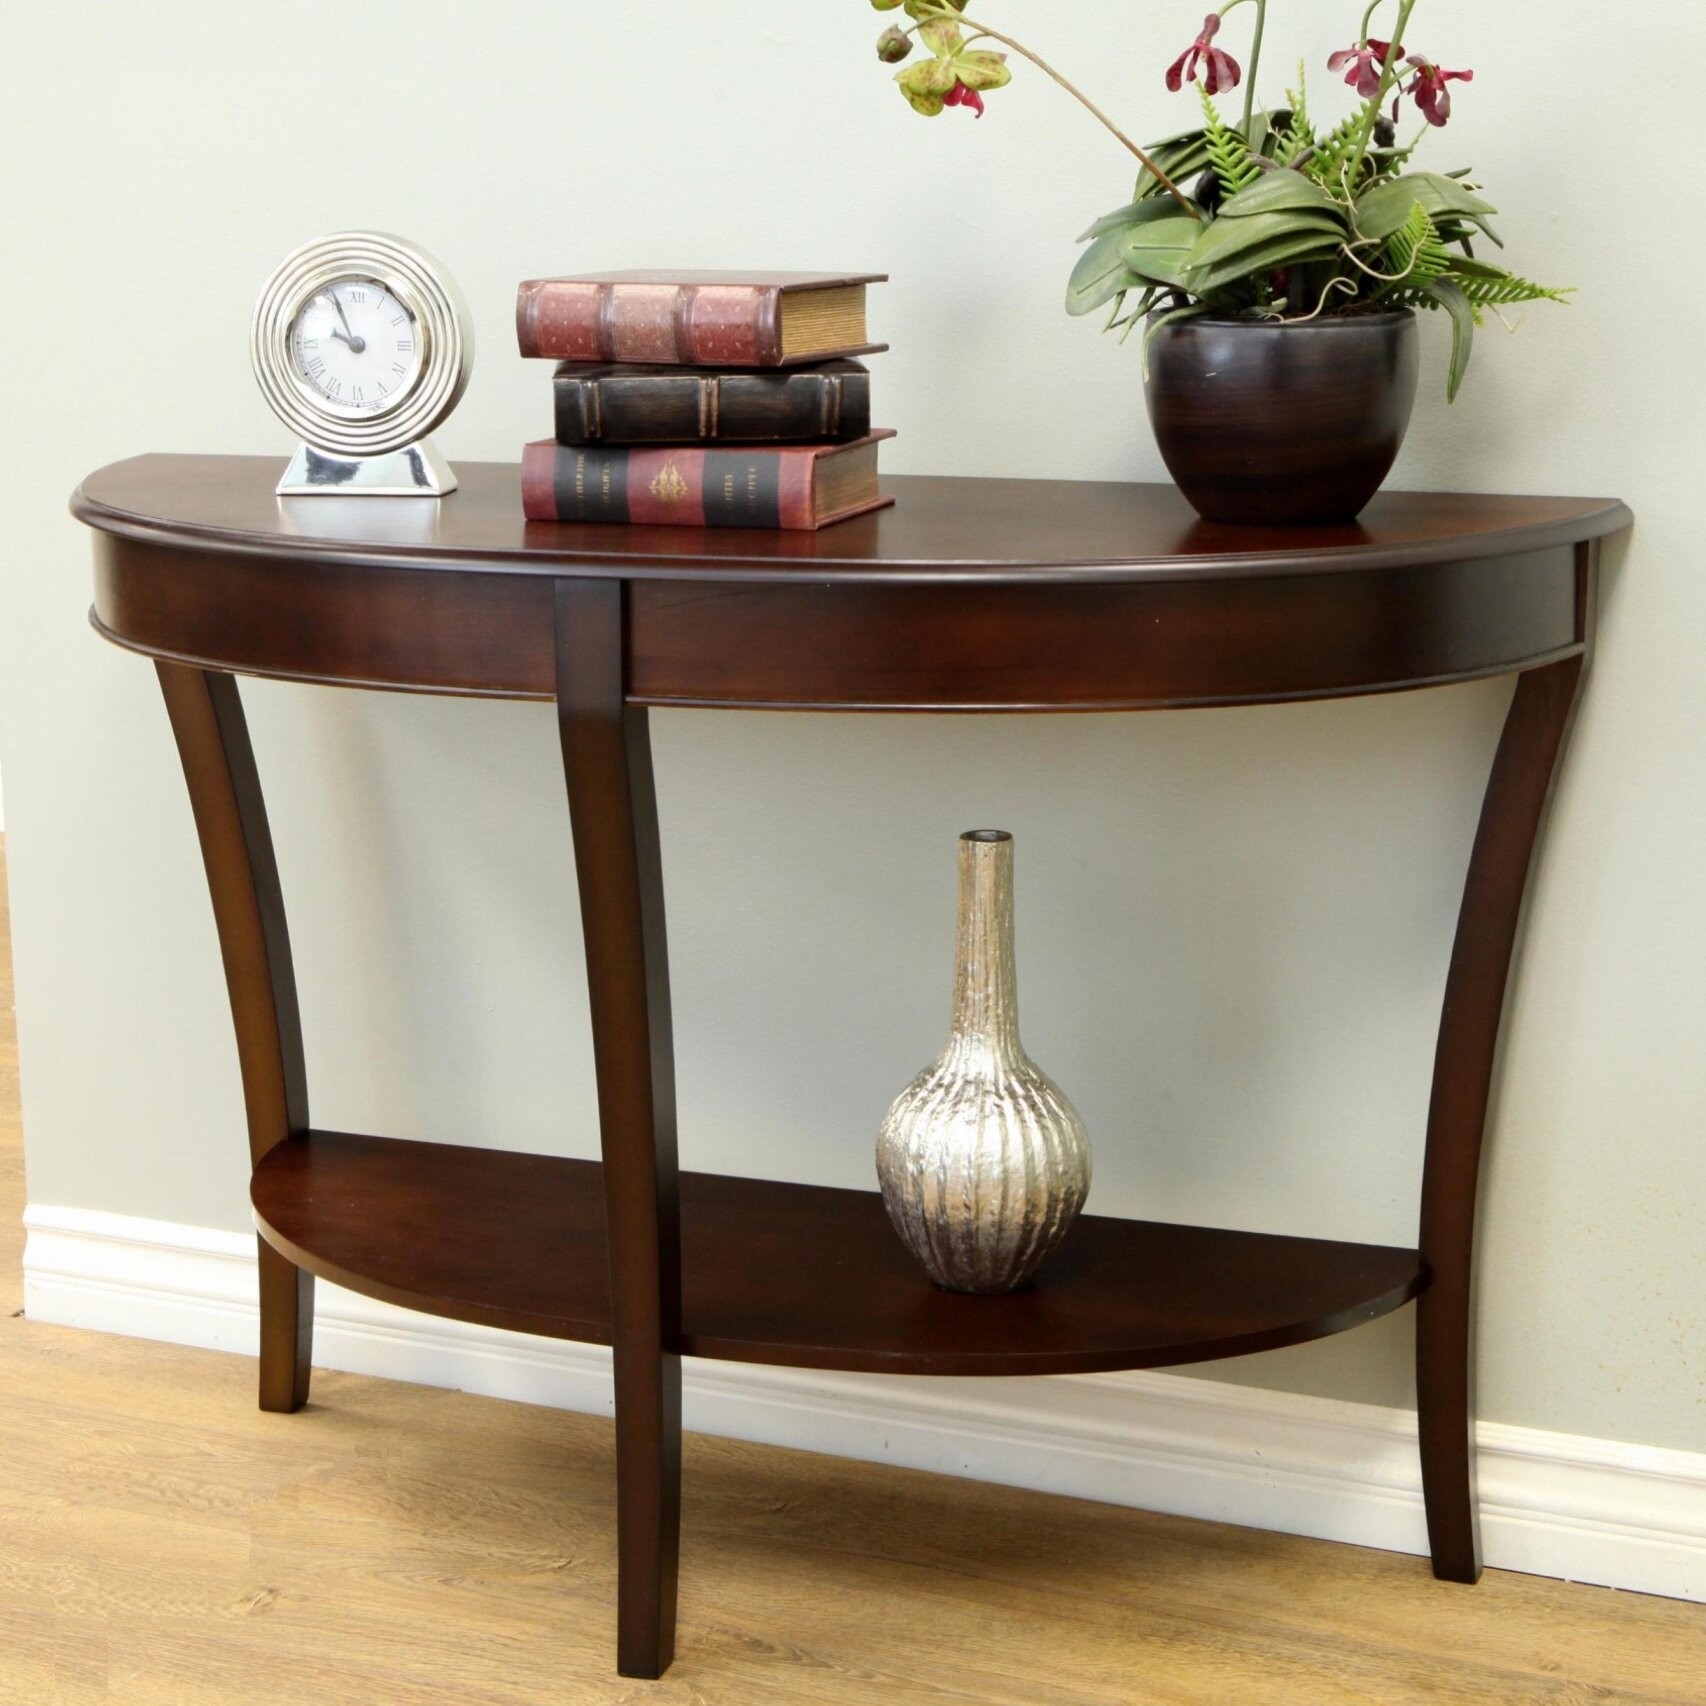 Half Round Entry Table Ideas On Foter